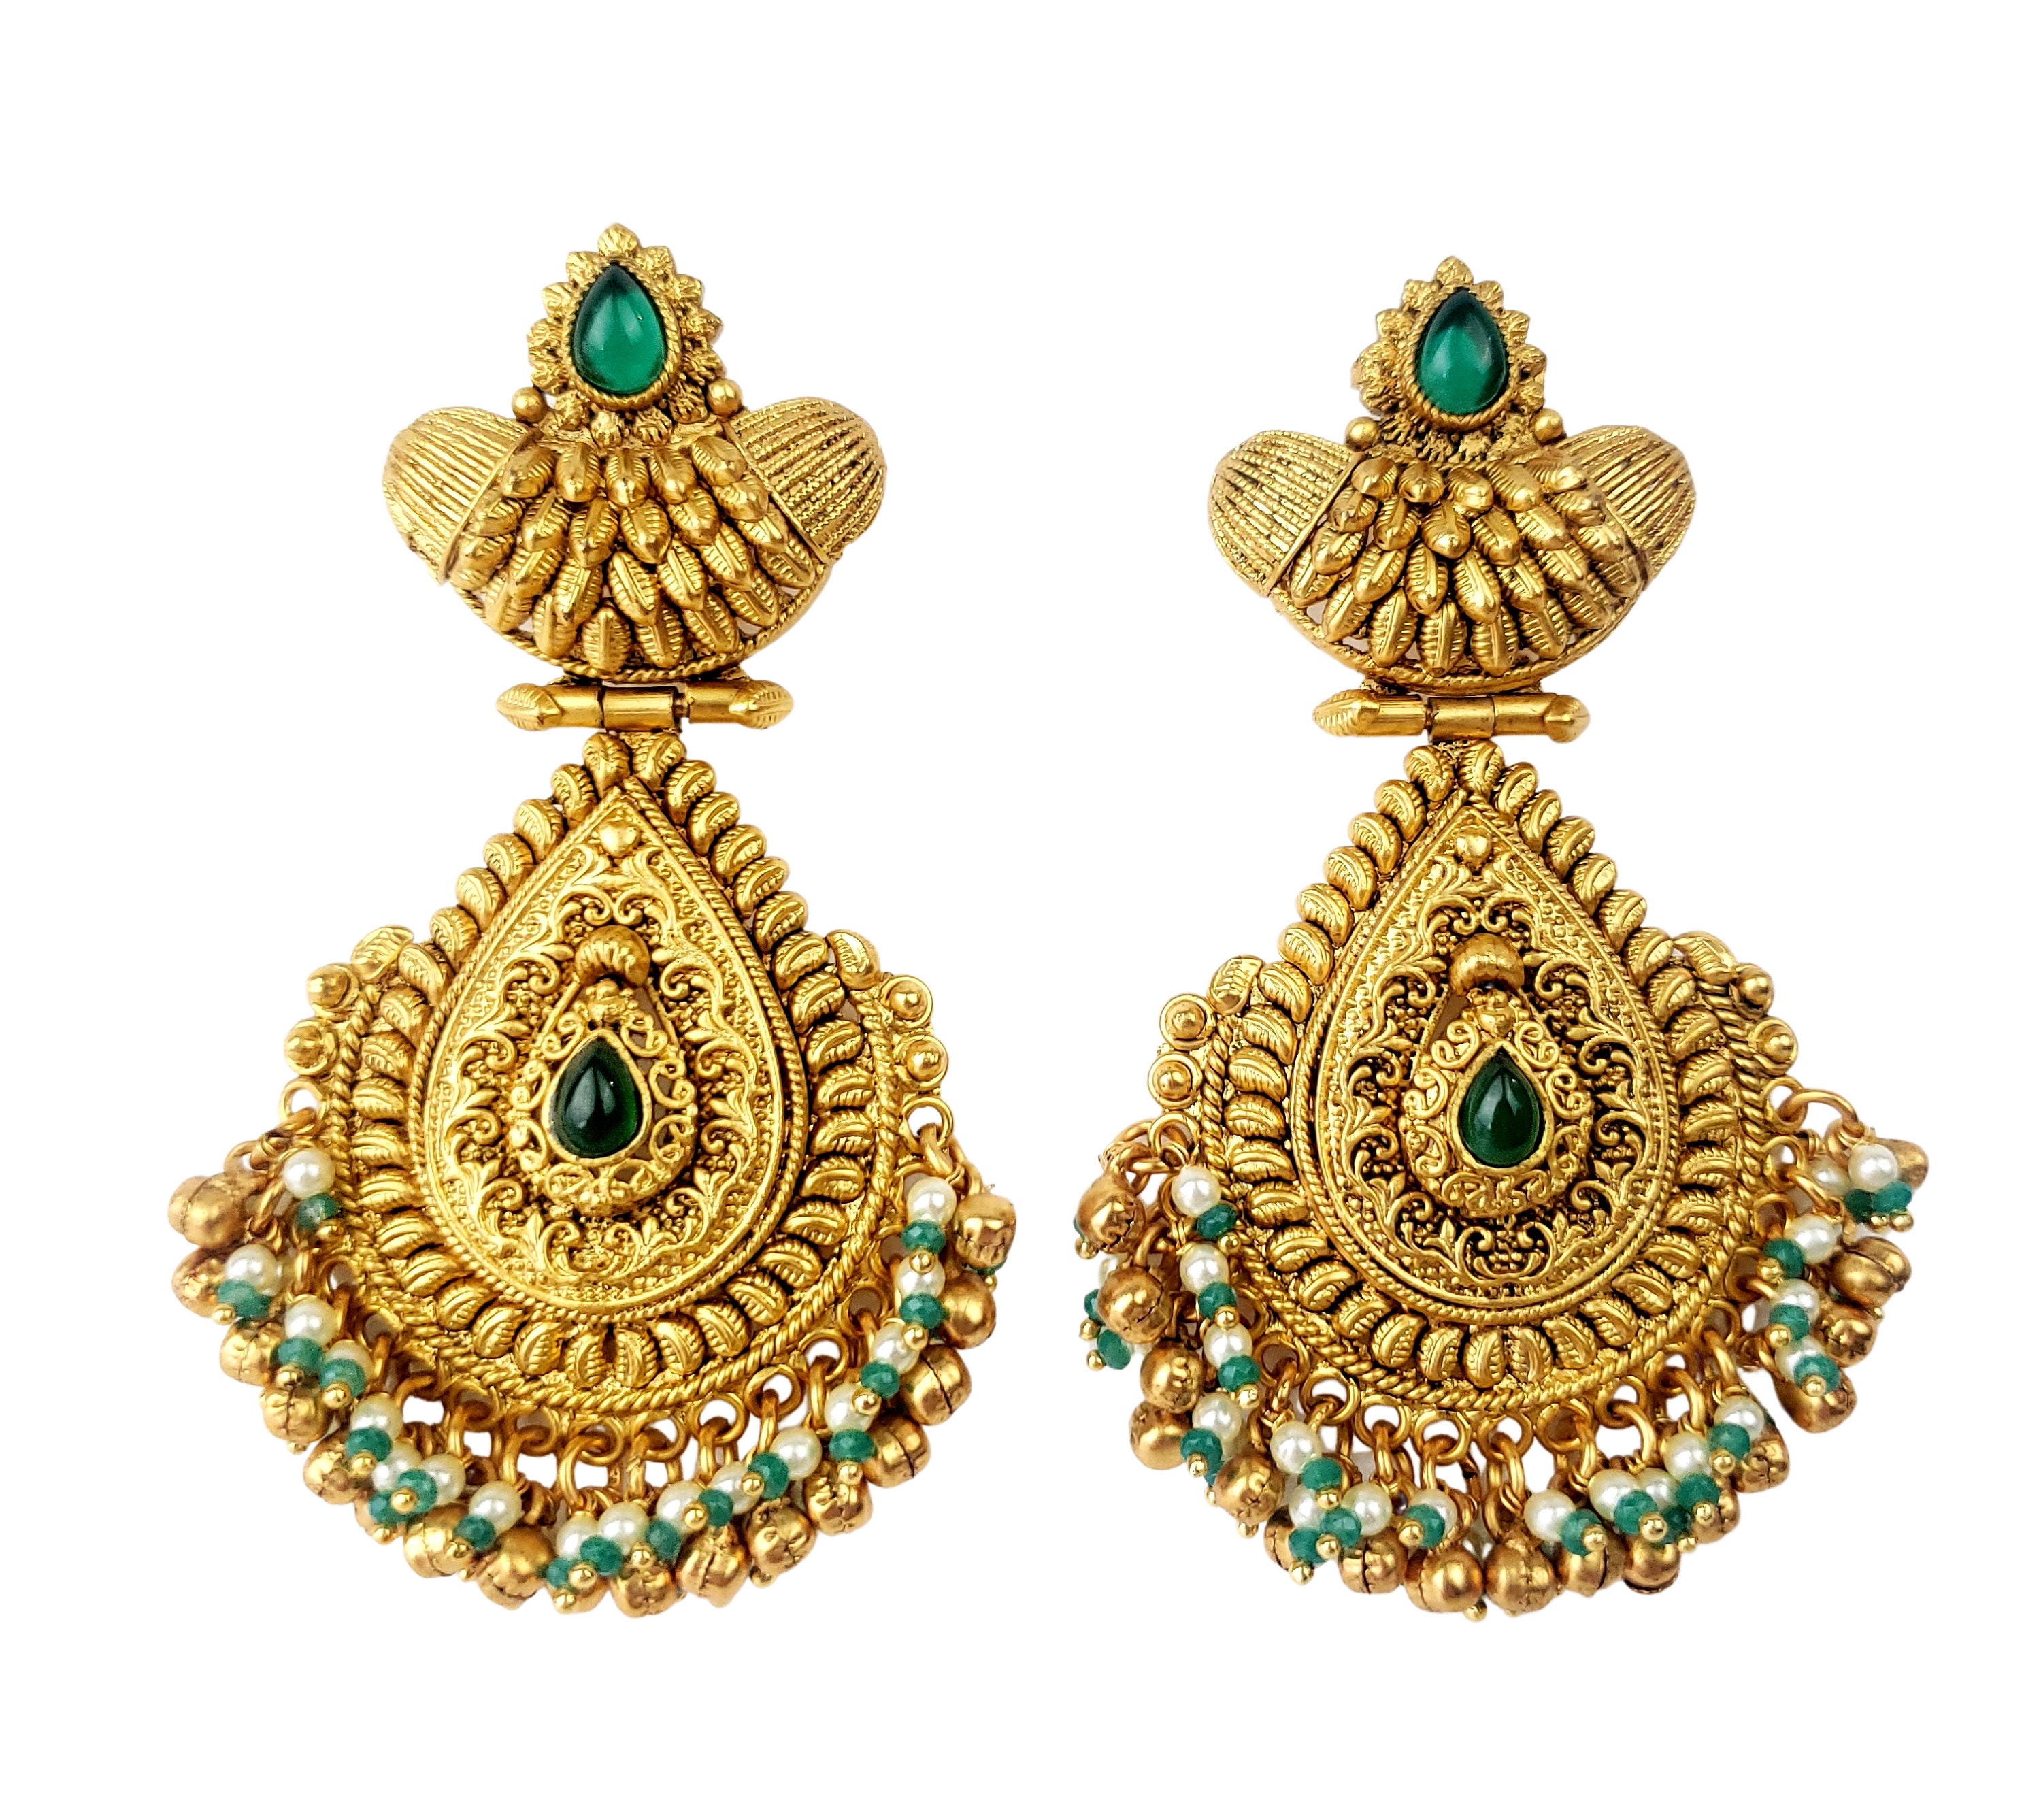 Ethnic Indian Traditional Bollywood Style Silver Oxidized Jhumka Long  Earrings | eBay